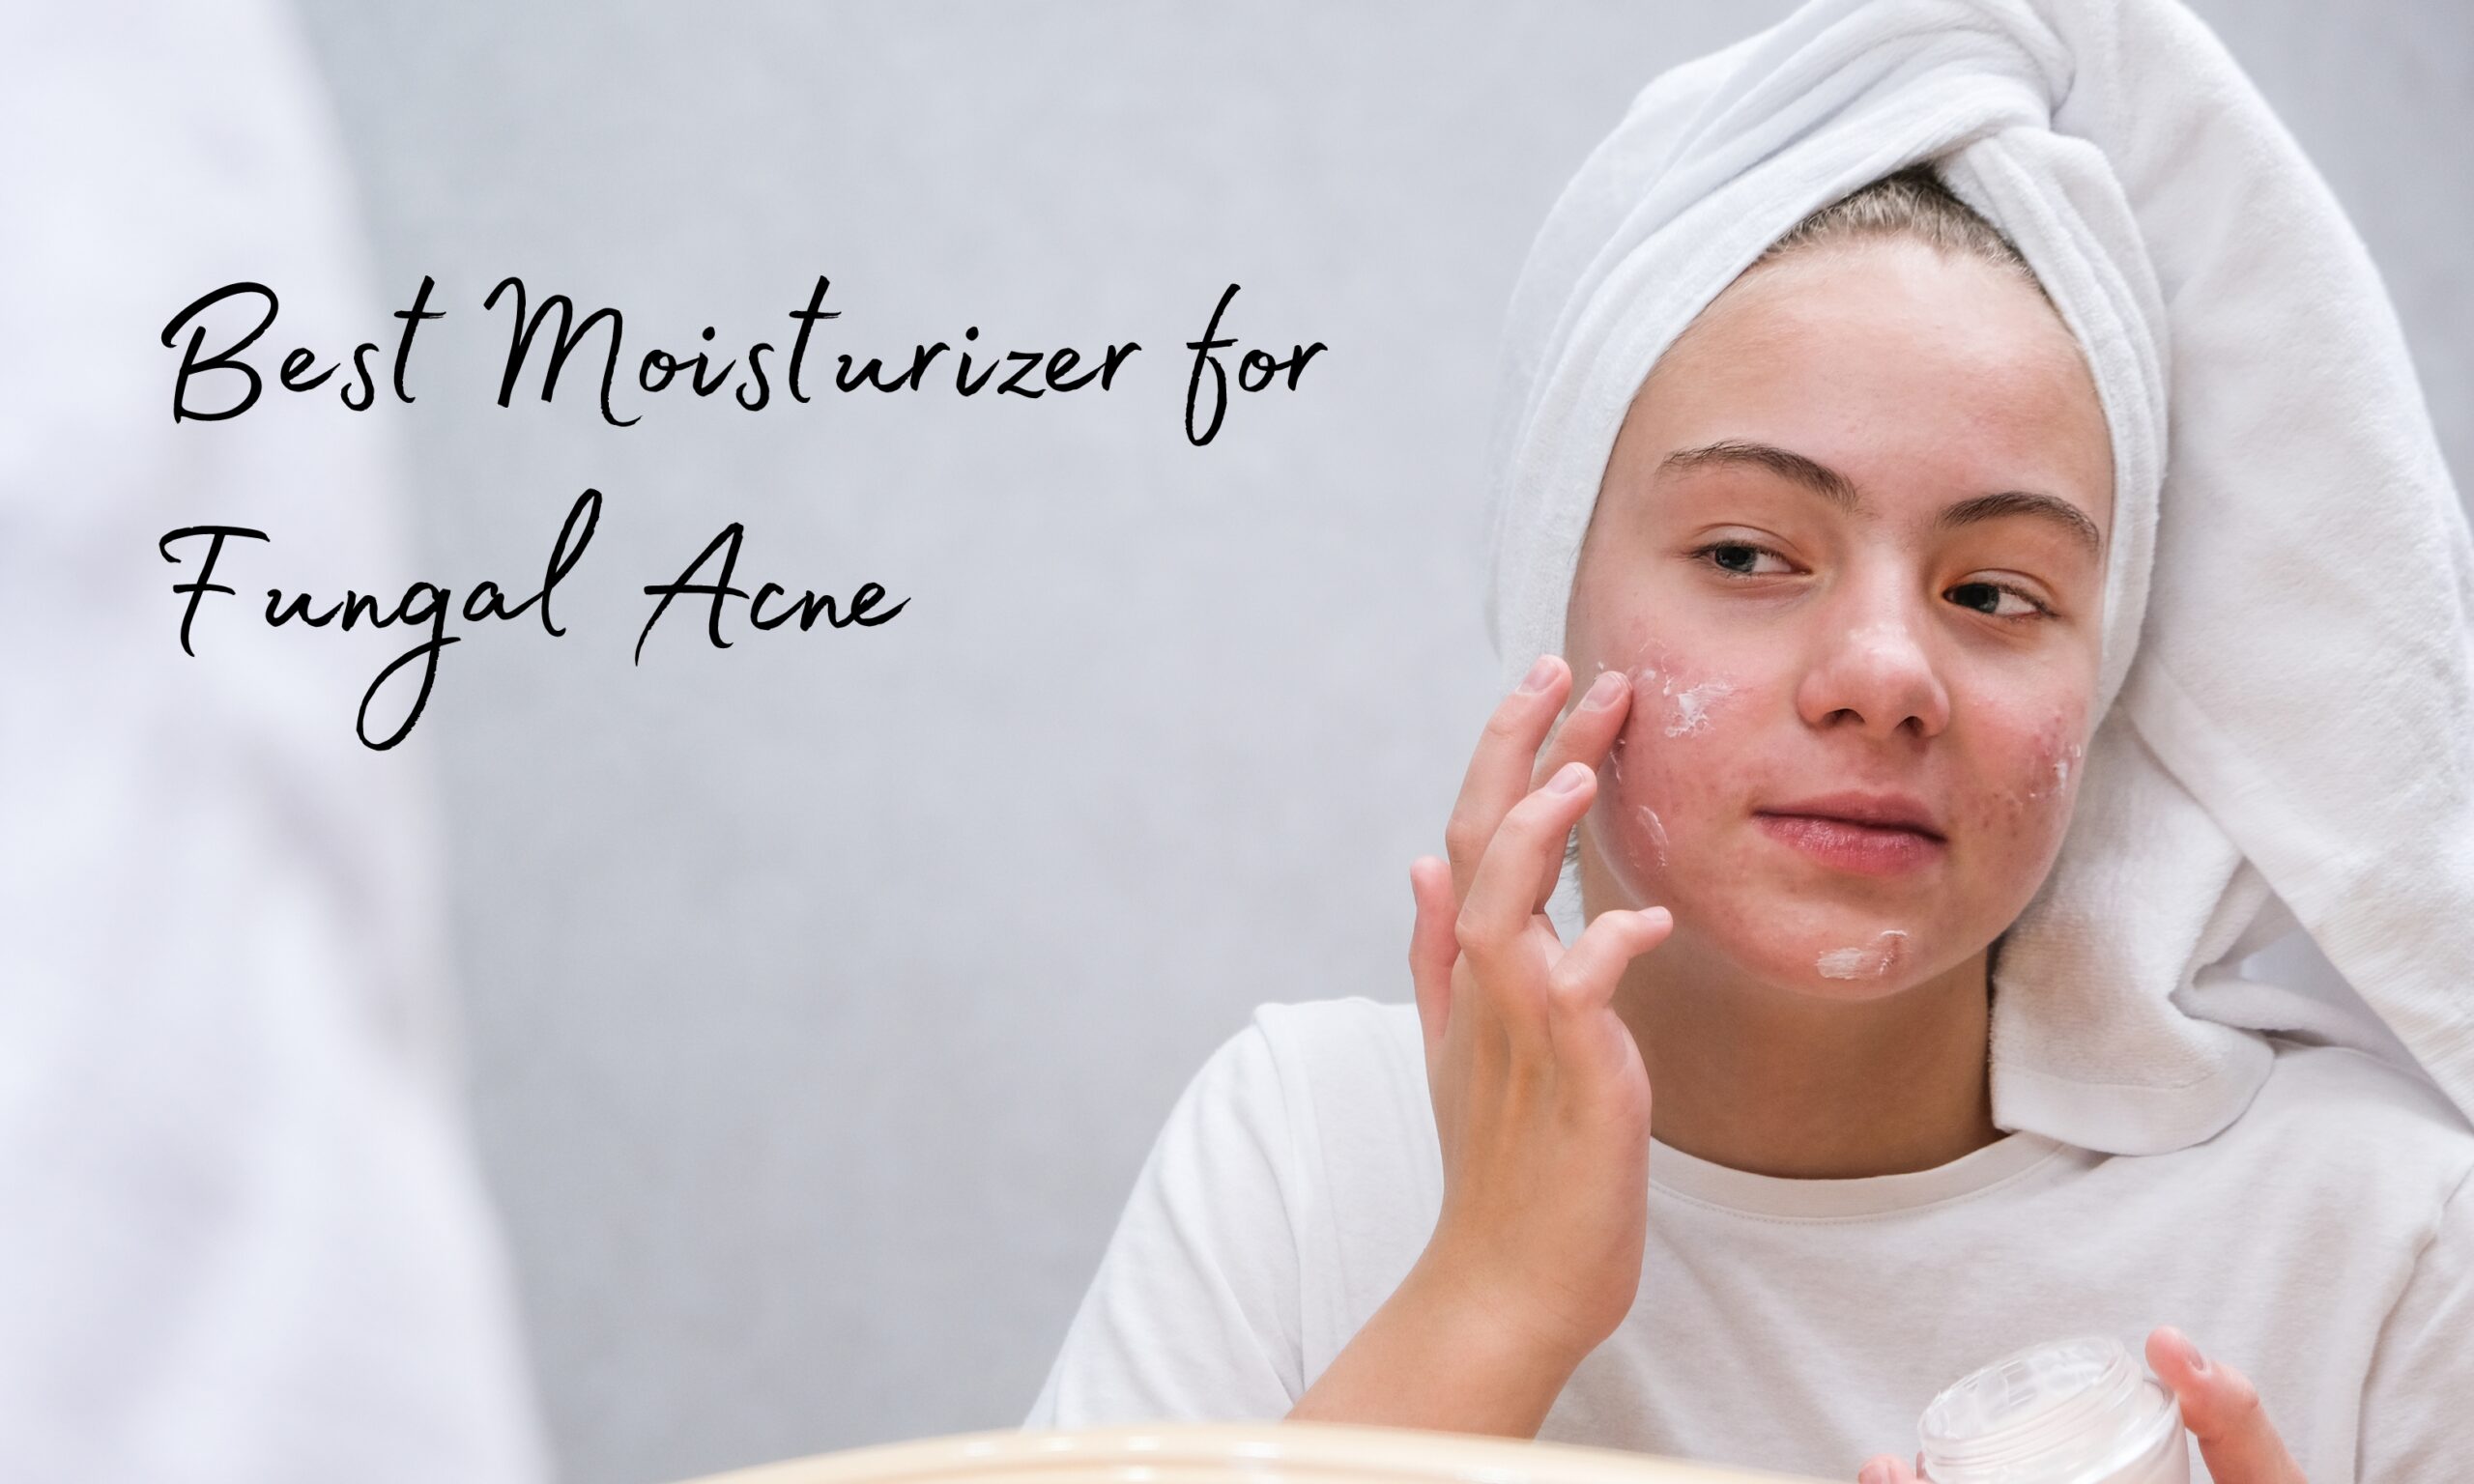 Moisturizer for Fungal Acne